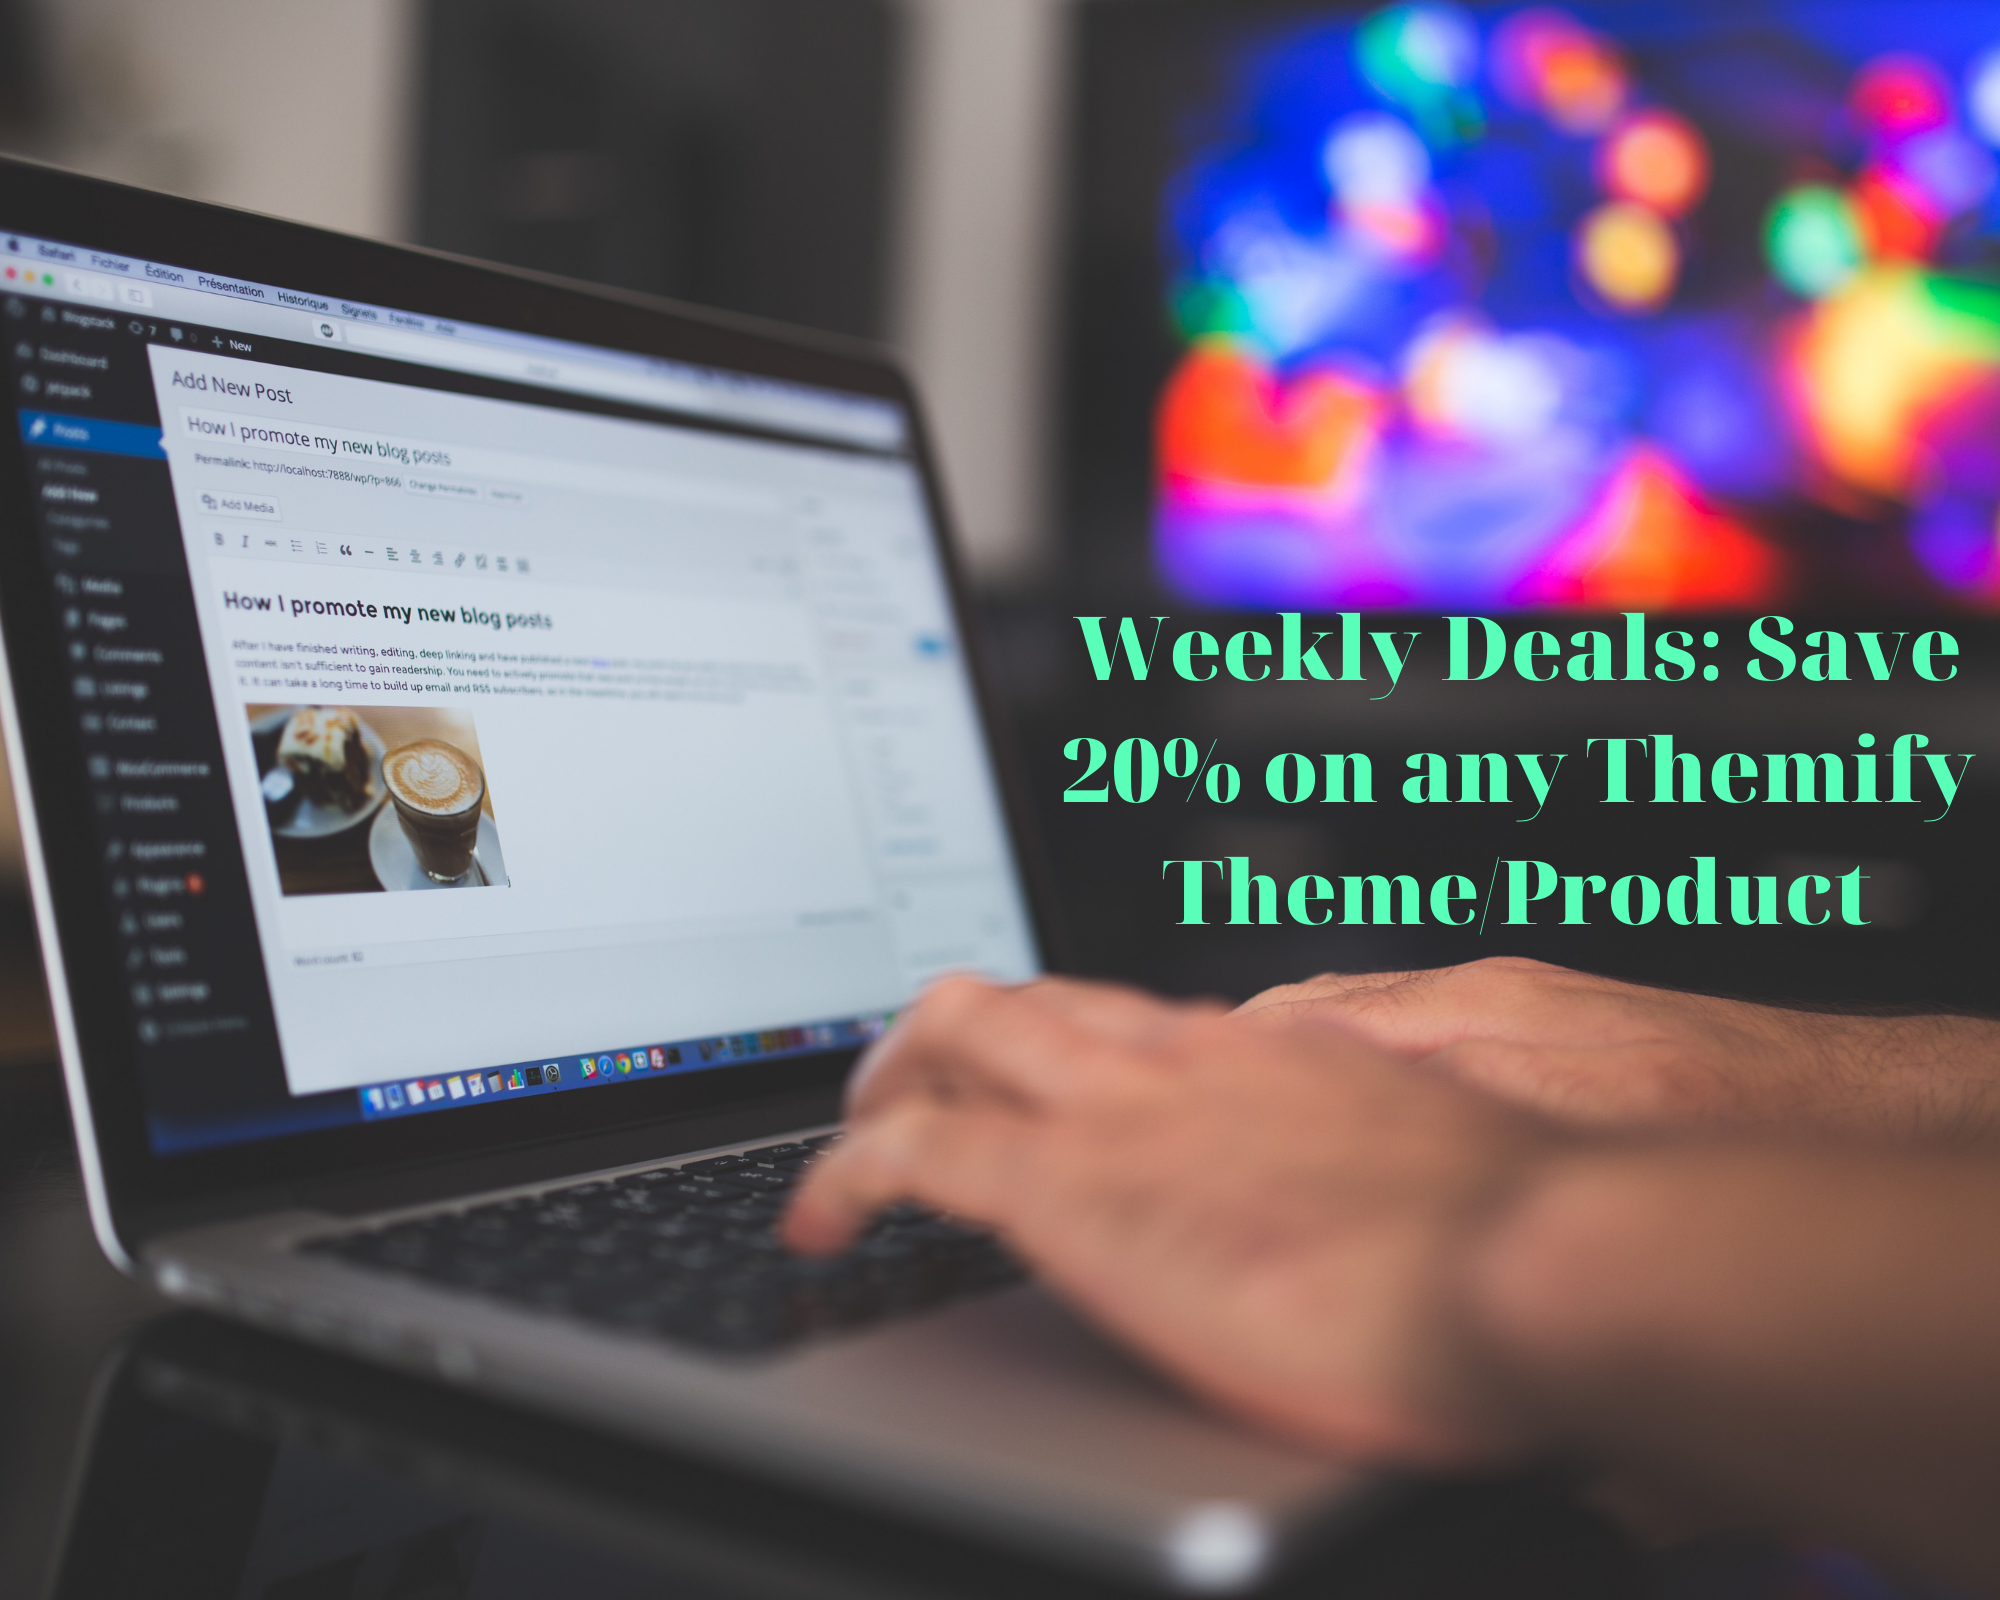 Weekly Deals: Save 20% on any Themify Theme/Product